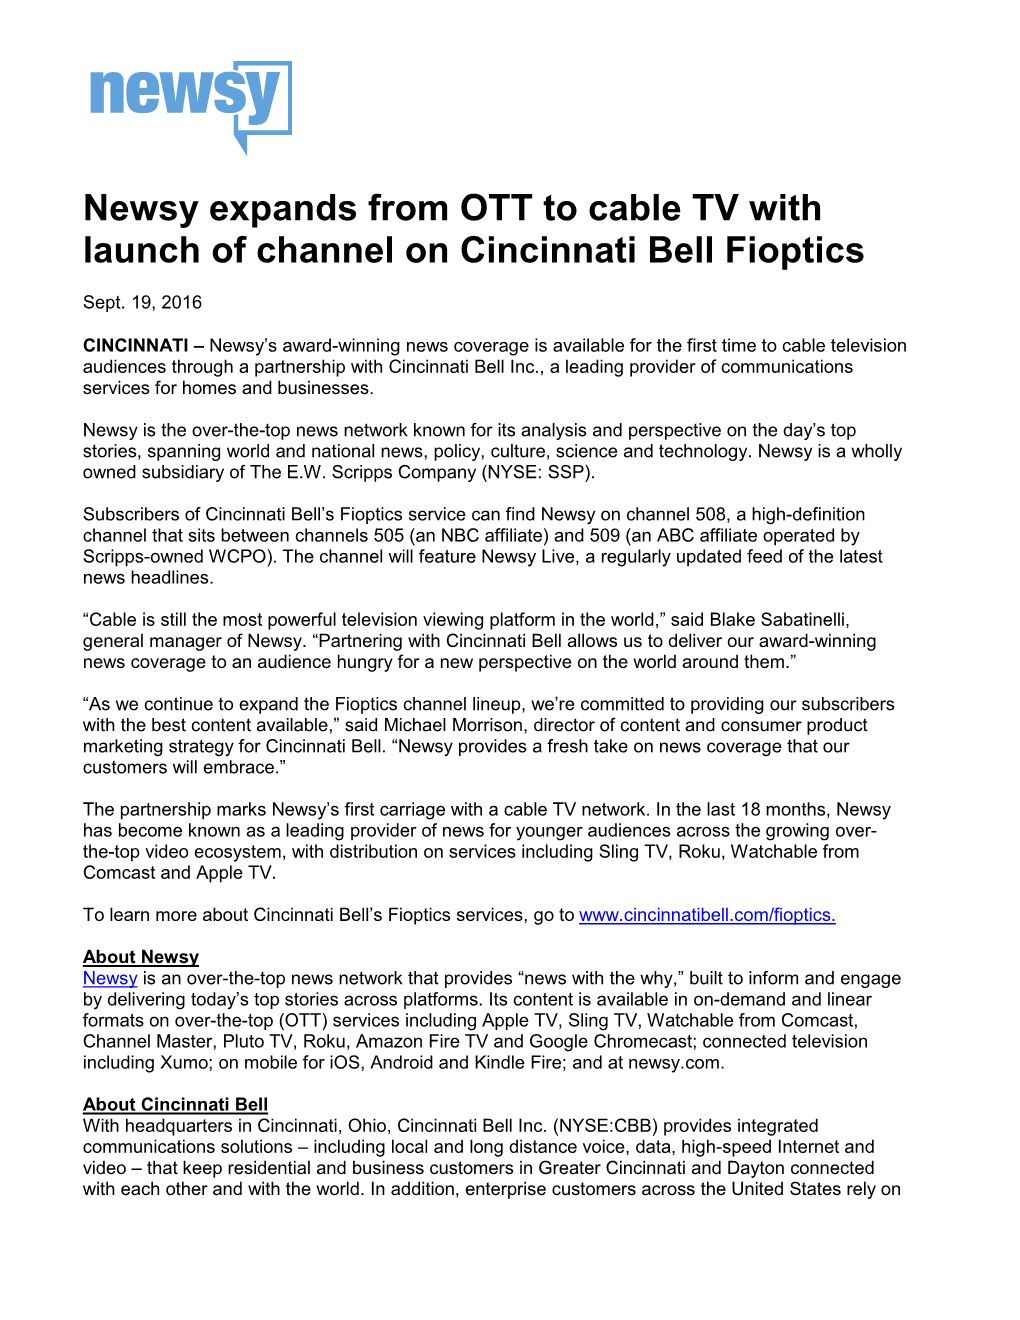 Newsy Expands from OTT to Cable TV with Launch of Channel on Cincinnati Bell Fioptics